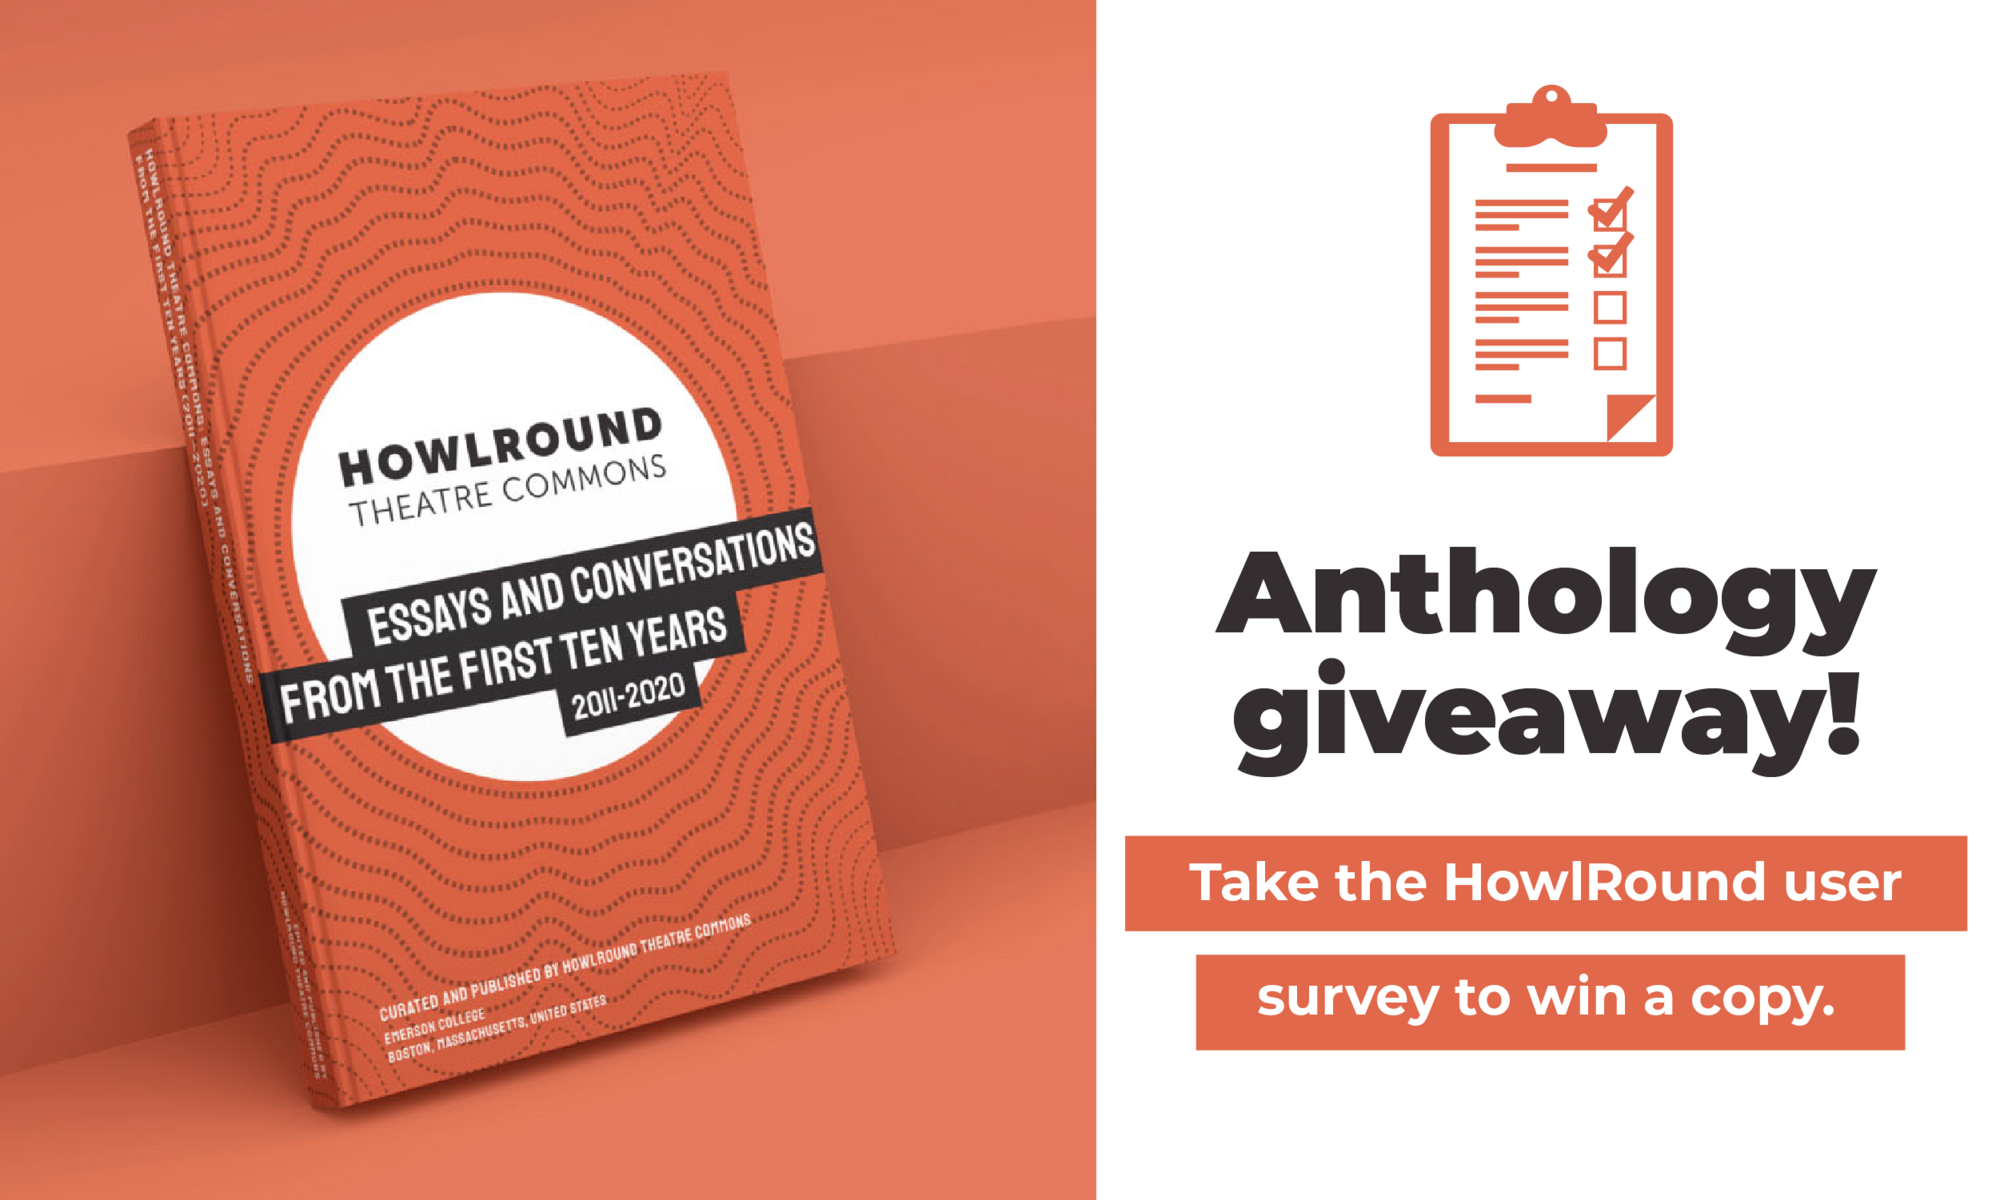 Anthology giveaway! Take the HowlRound user survey to win a copy.